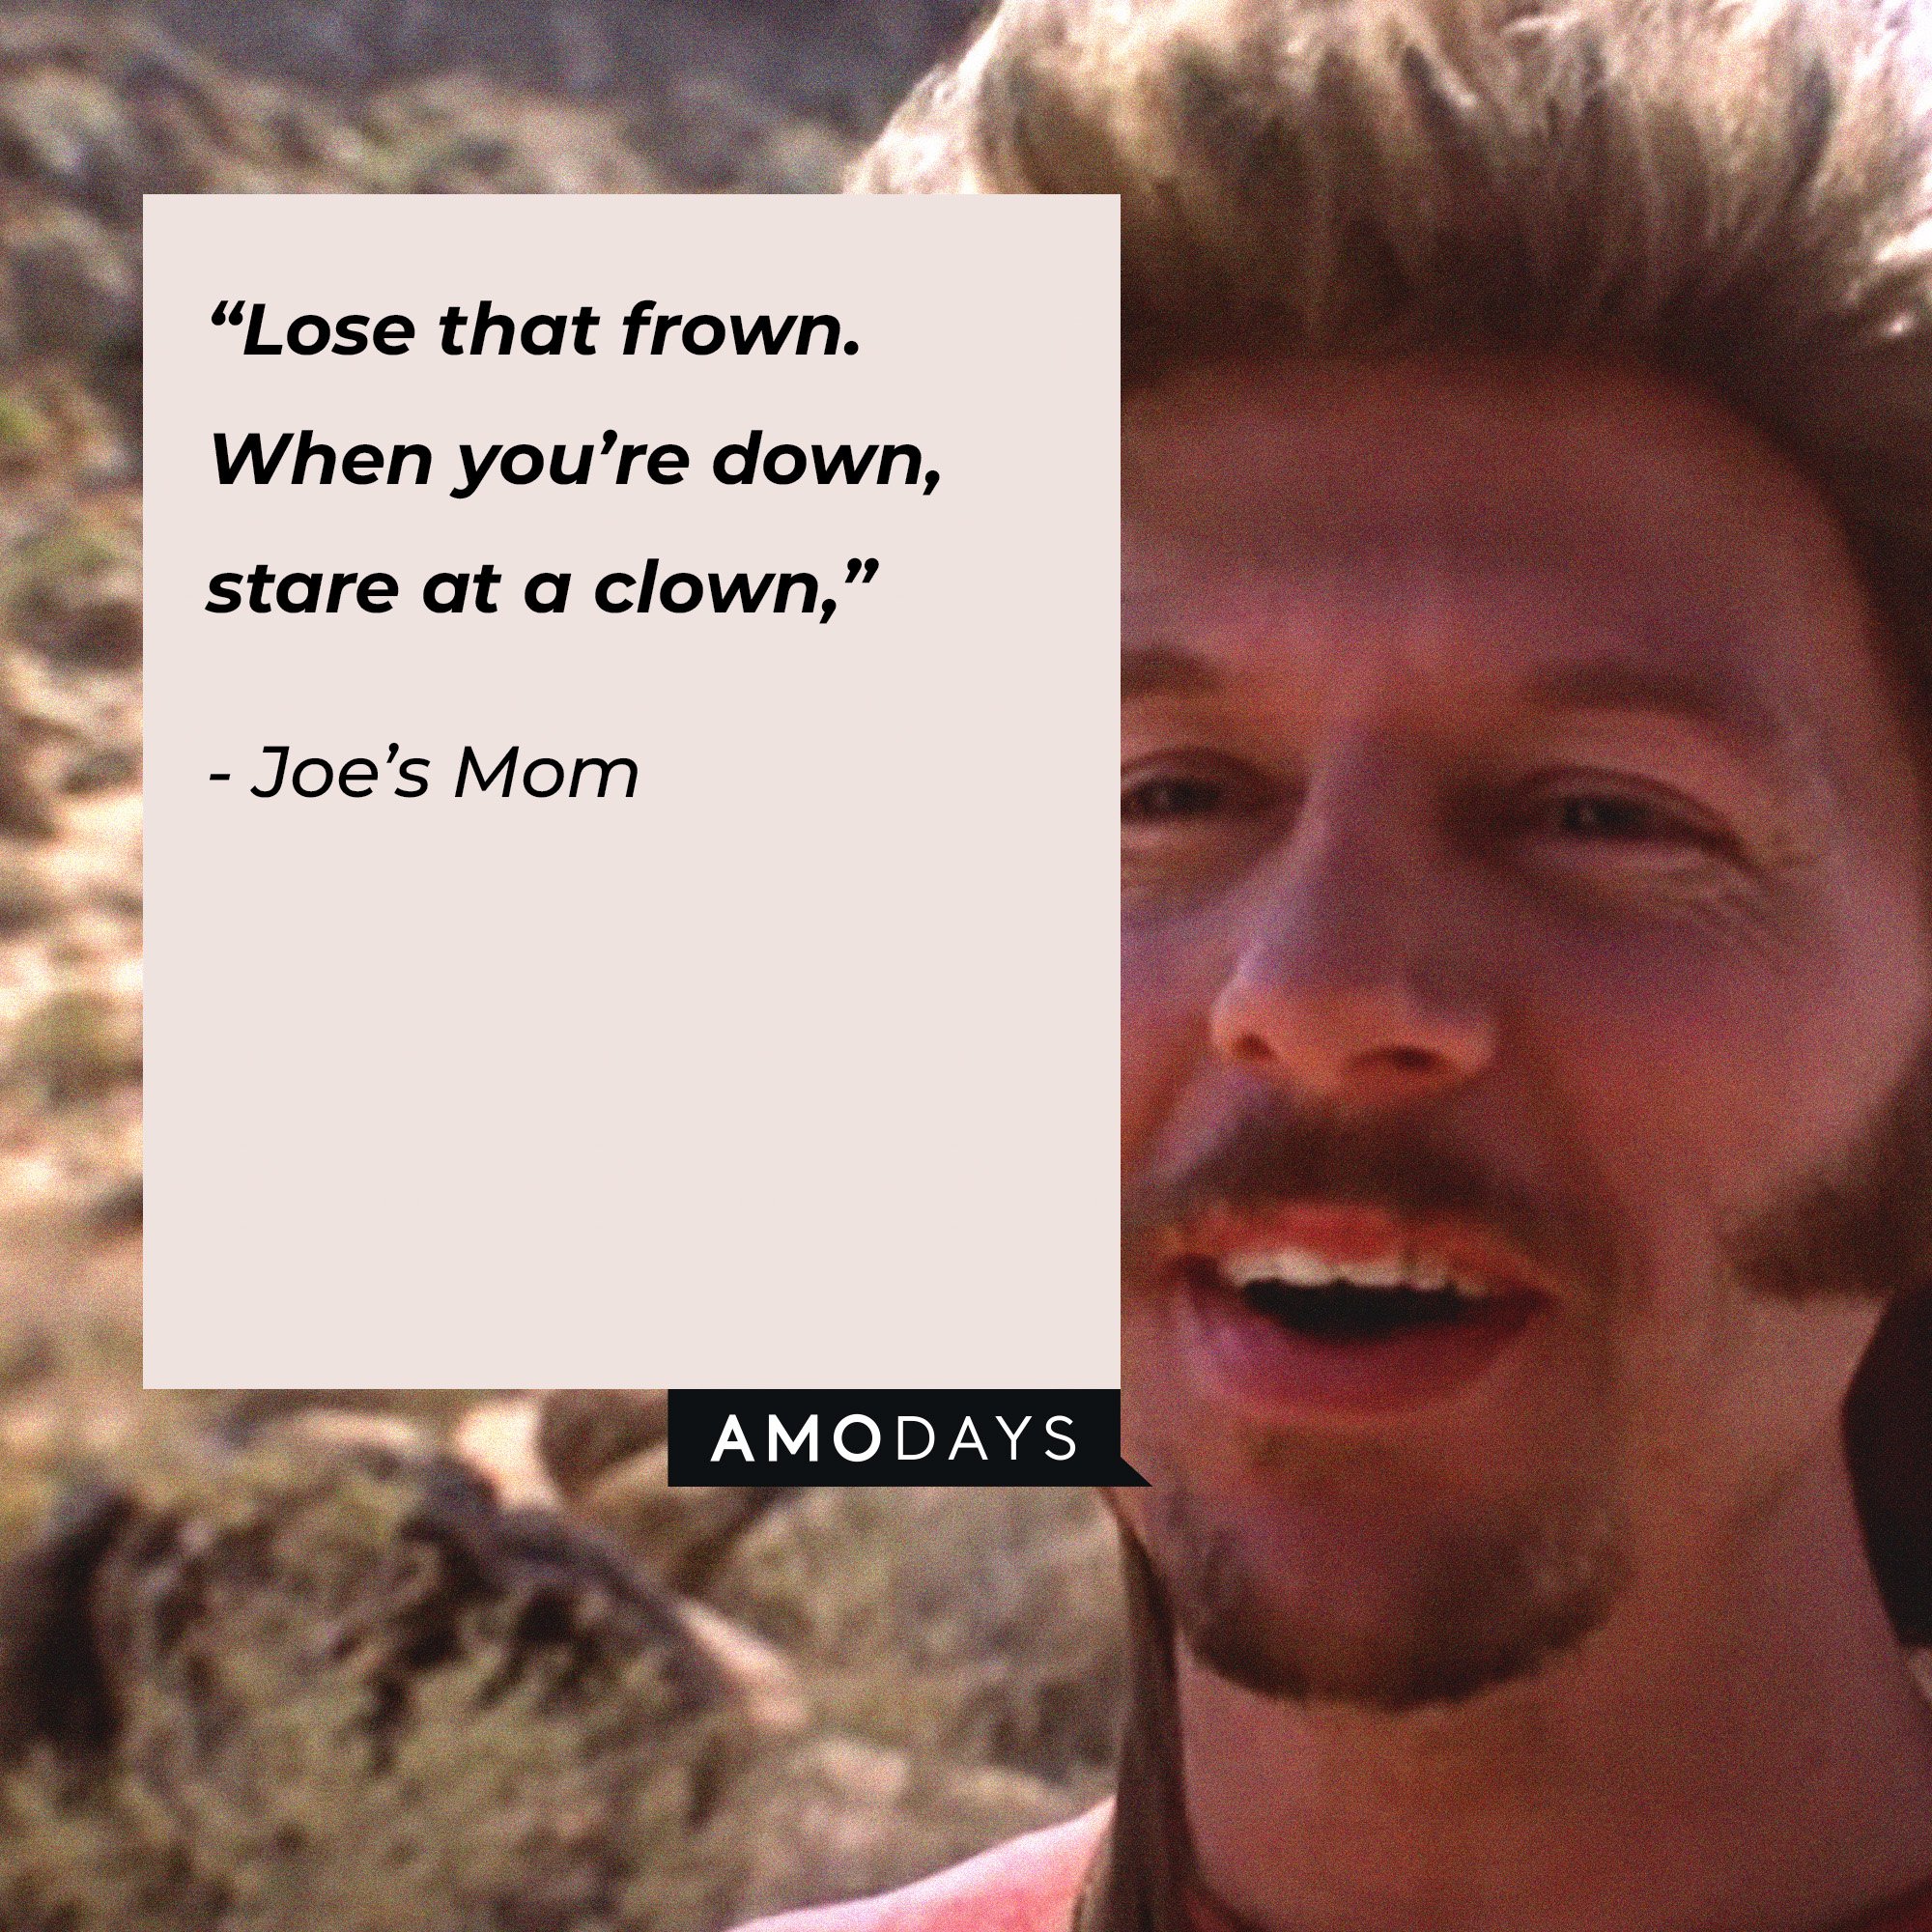 Joe’s Mom's quote: “Lose that frown. When you’re down, stare at a clown.” | Image: AmoDays